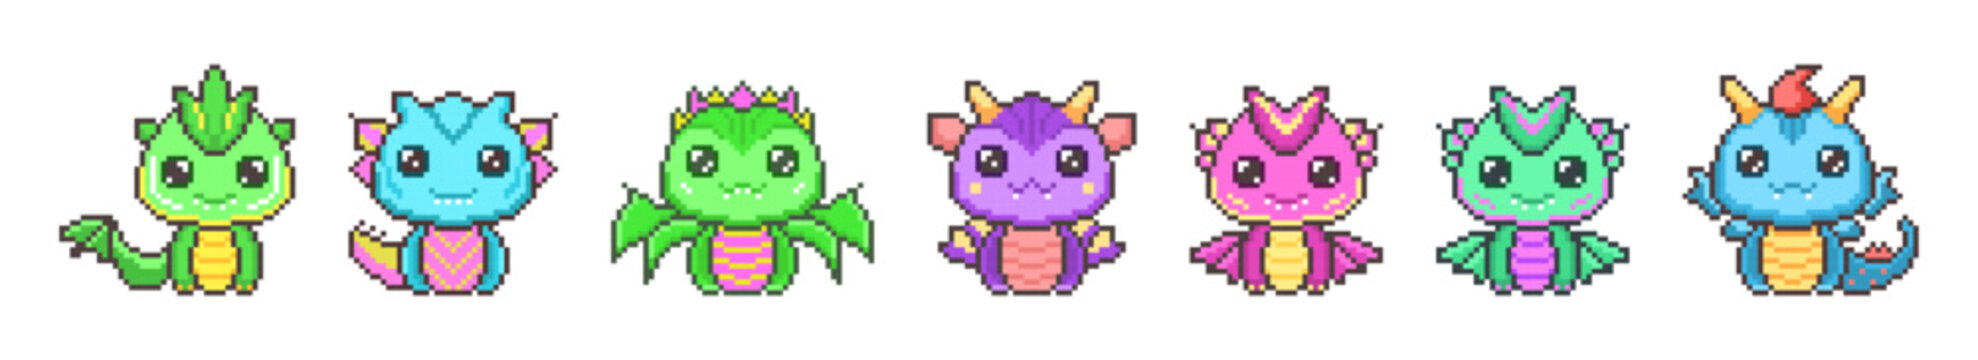 Cute colorful pixel dragons set. Kawaii purple funny dinosaur with green fantasy 8bit graphics and blue horns and legendary smiling little vector monsters